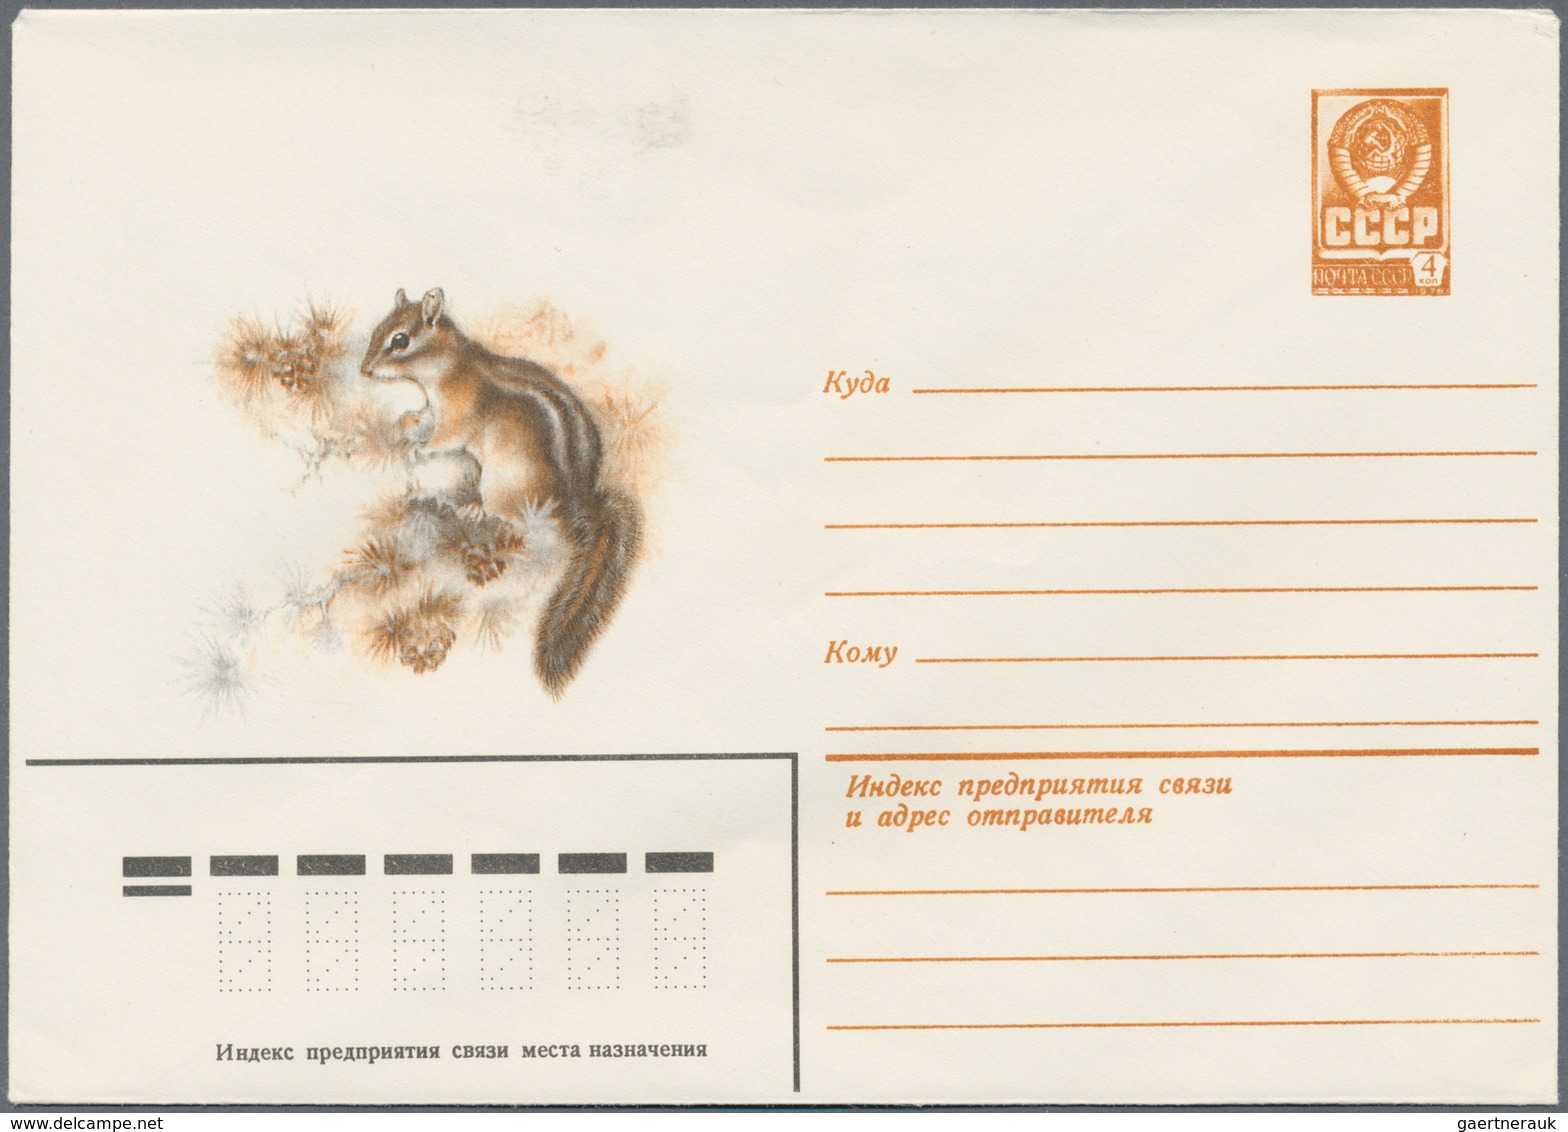 Sowjetunion - Ganzsachen: 1979 Accumulation Of Ca. 1.240 Unused Picture Postal Stationery Envelopes, - Sin Clasificación